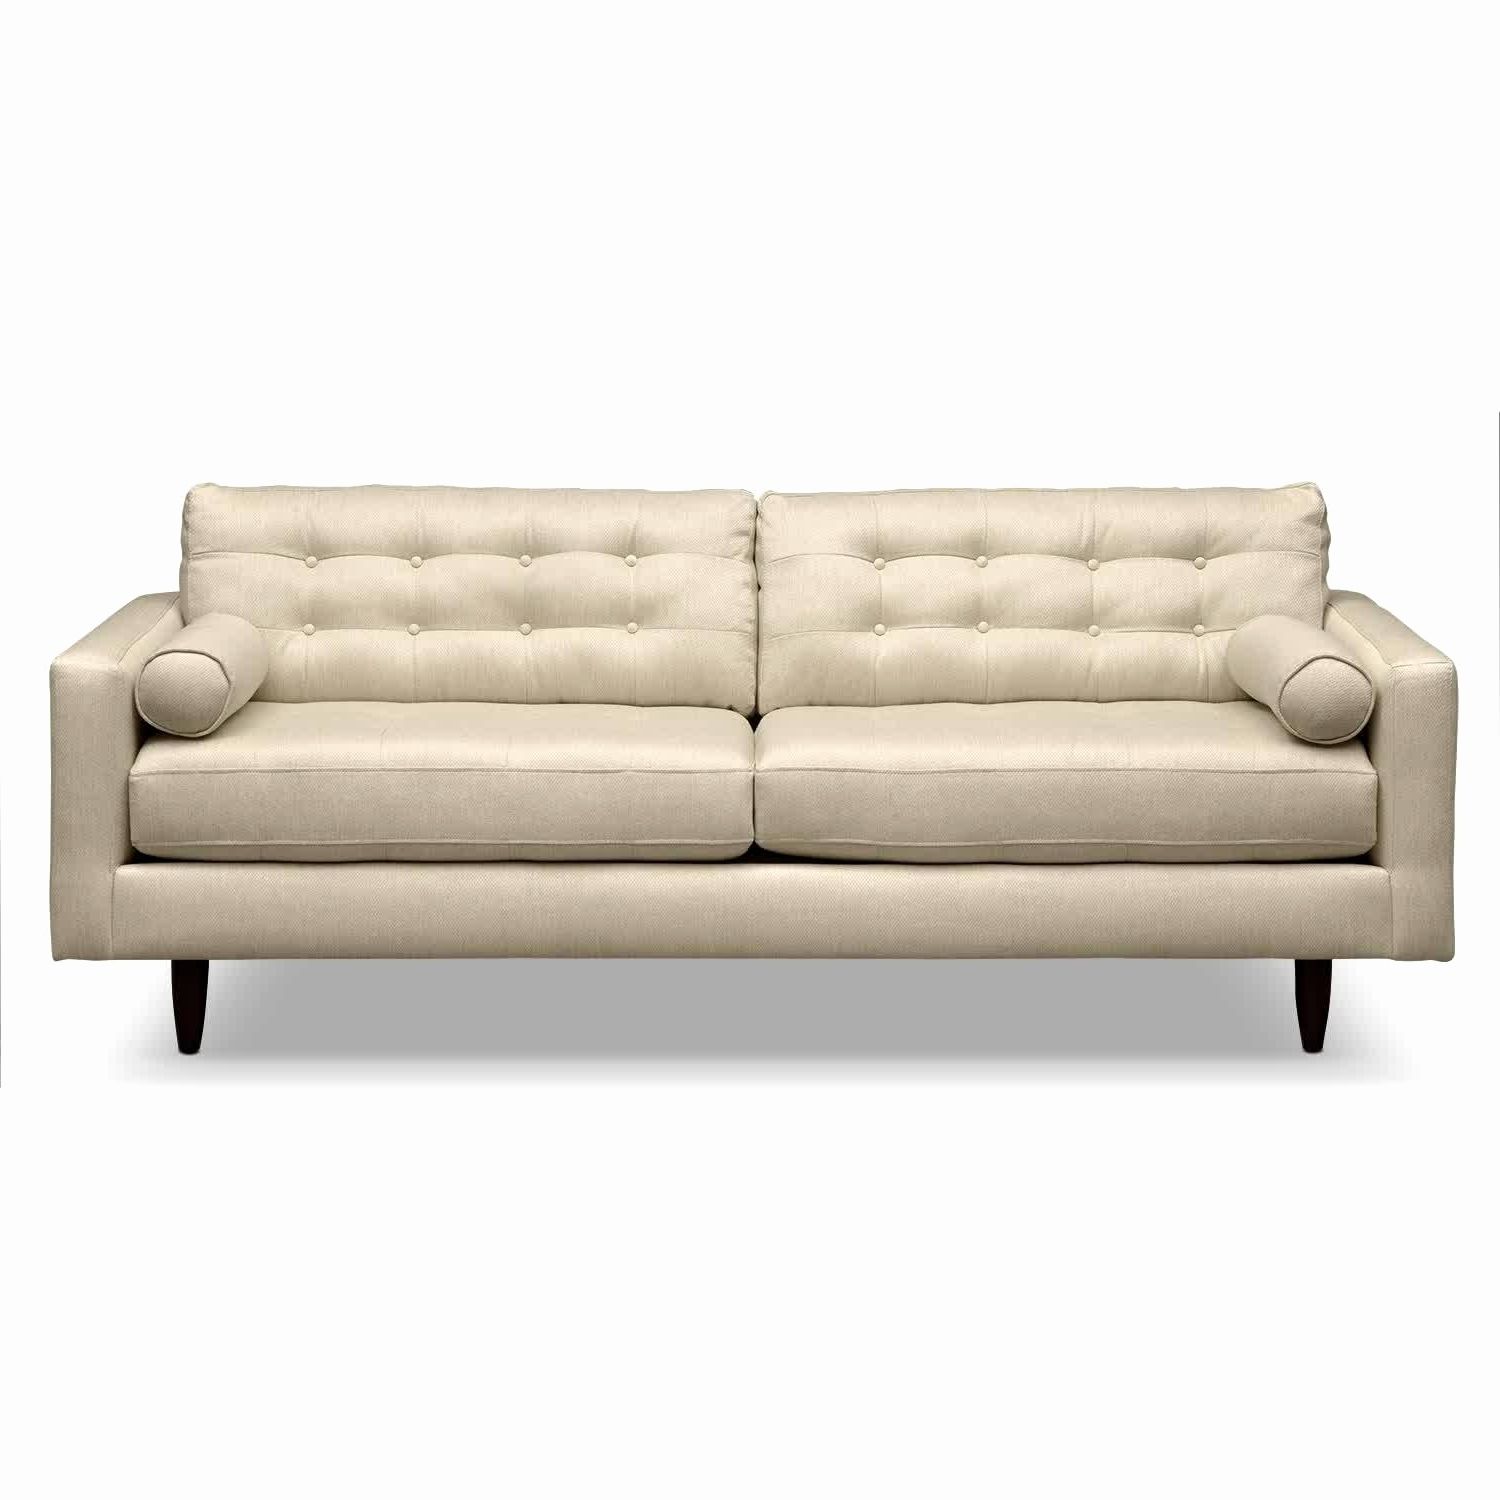 Lovely Affordable Tufted Sofa 2018 – Couches And Sofas Ideas With Regard To Well Liked Affordable Tufted Sofas (Photo 8 of 15)